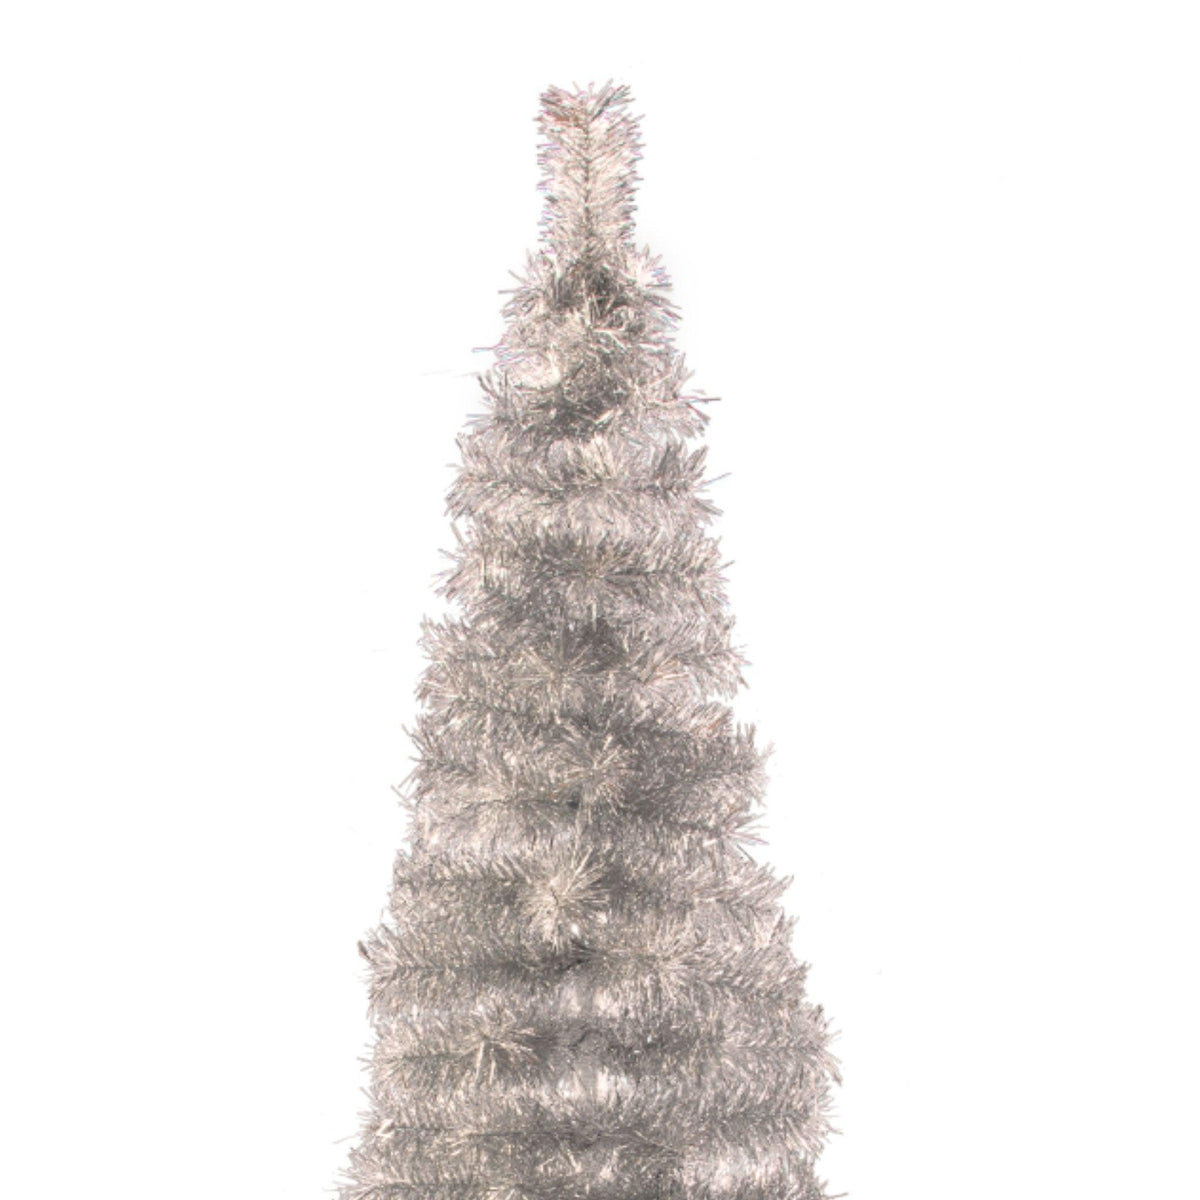 Top of the 10FT Silver Pencil Tinsel Christmas Tree from leedisplay.com